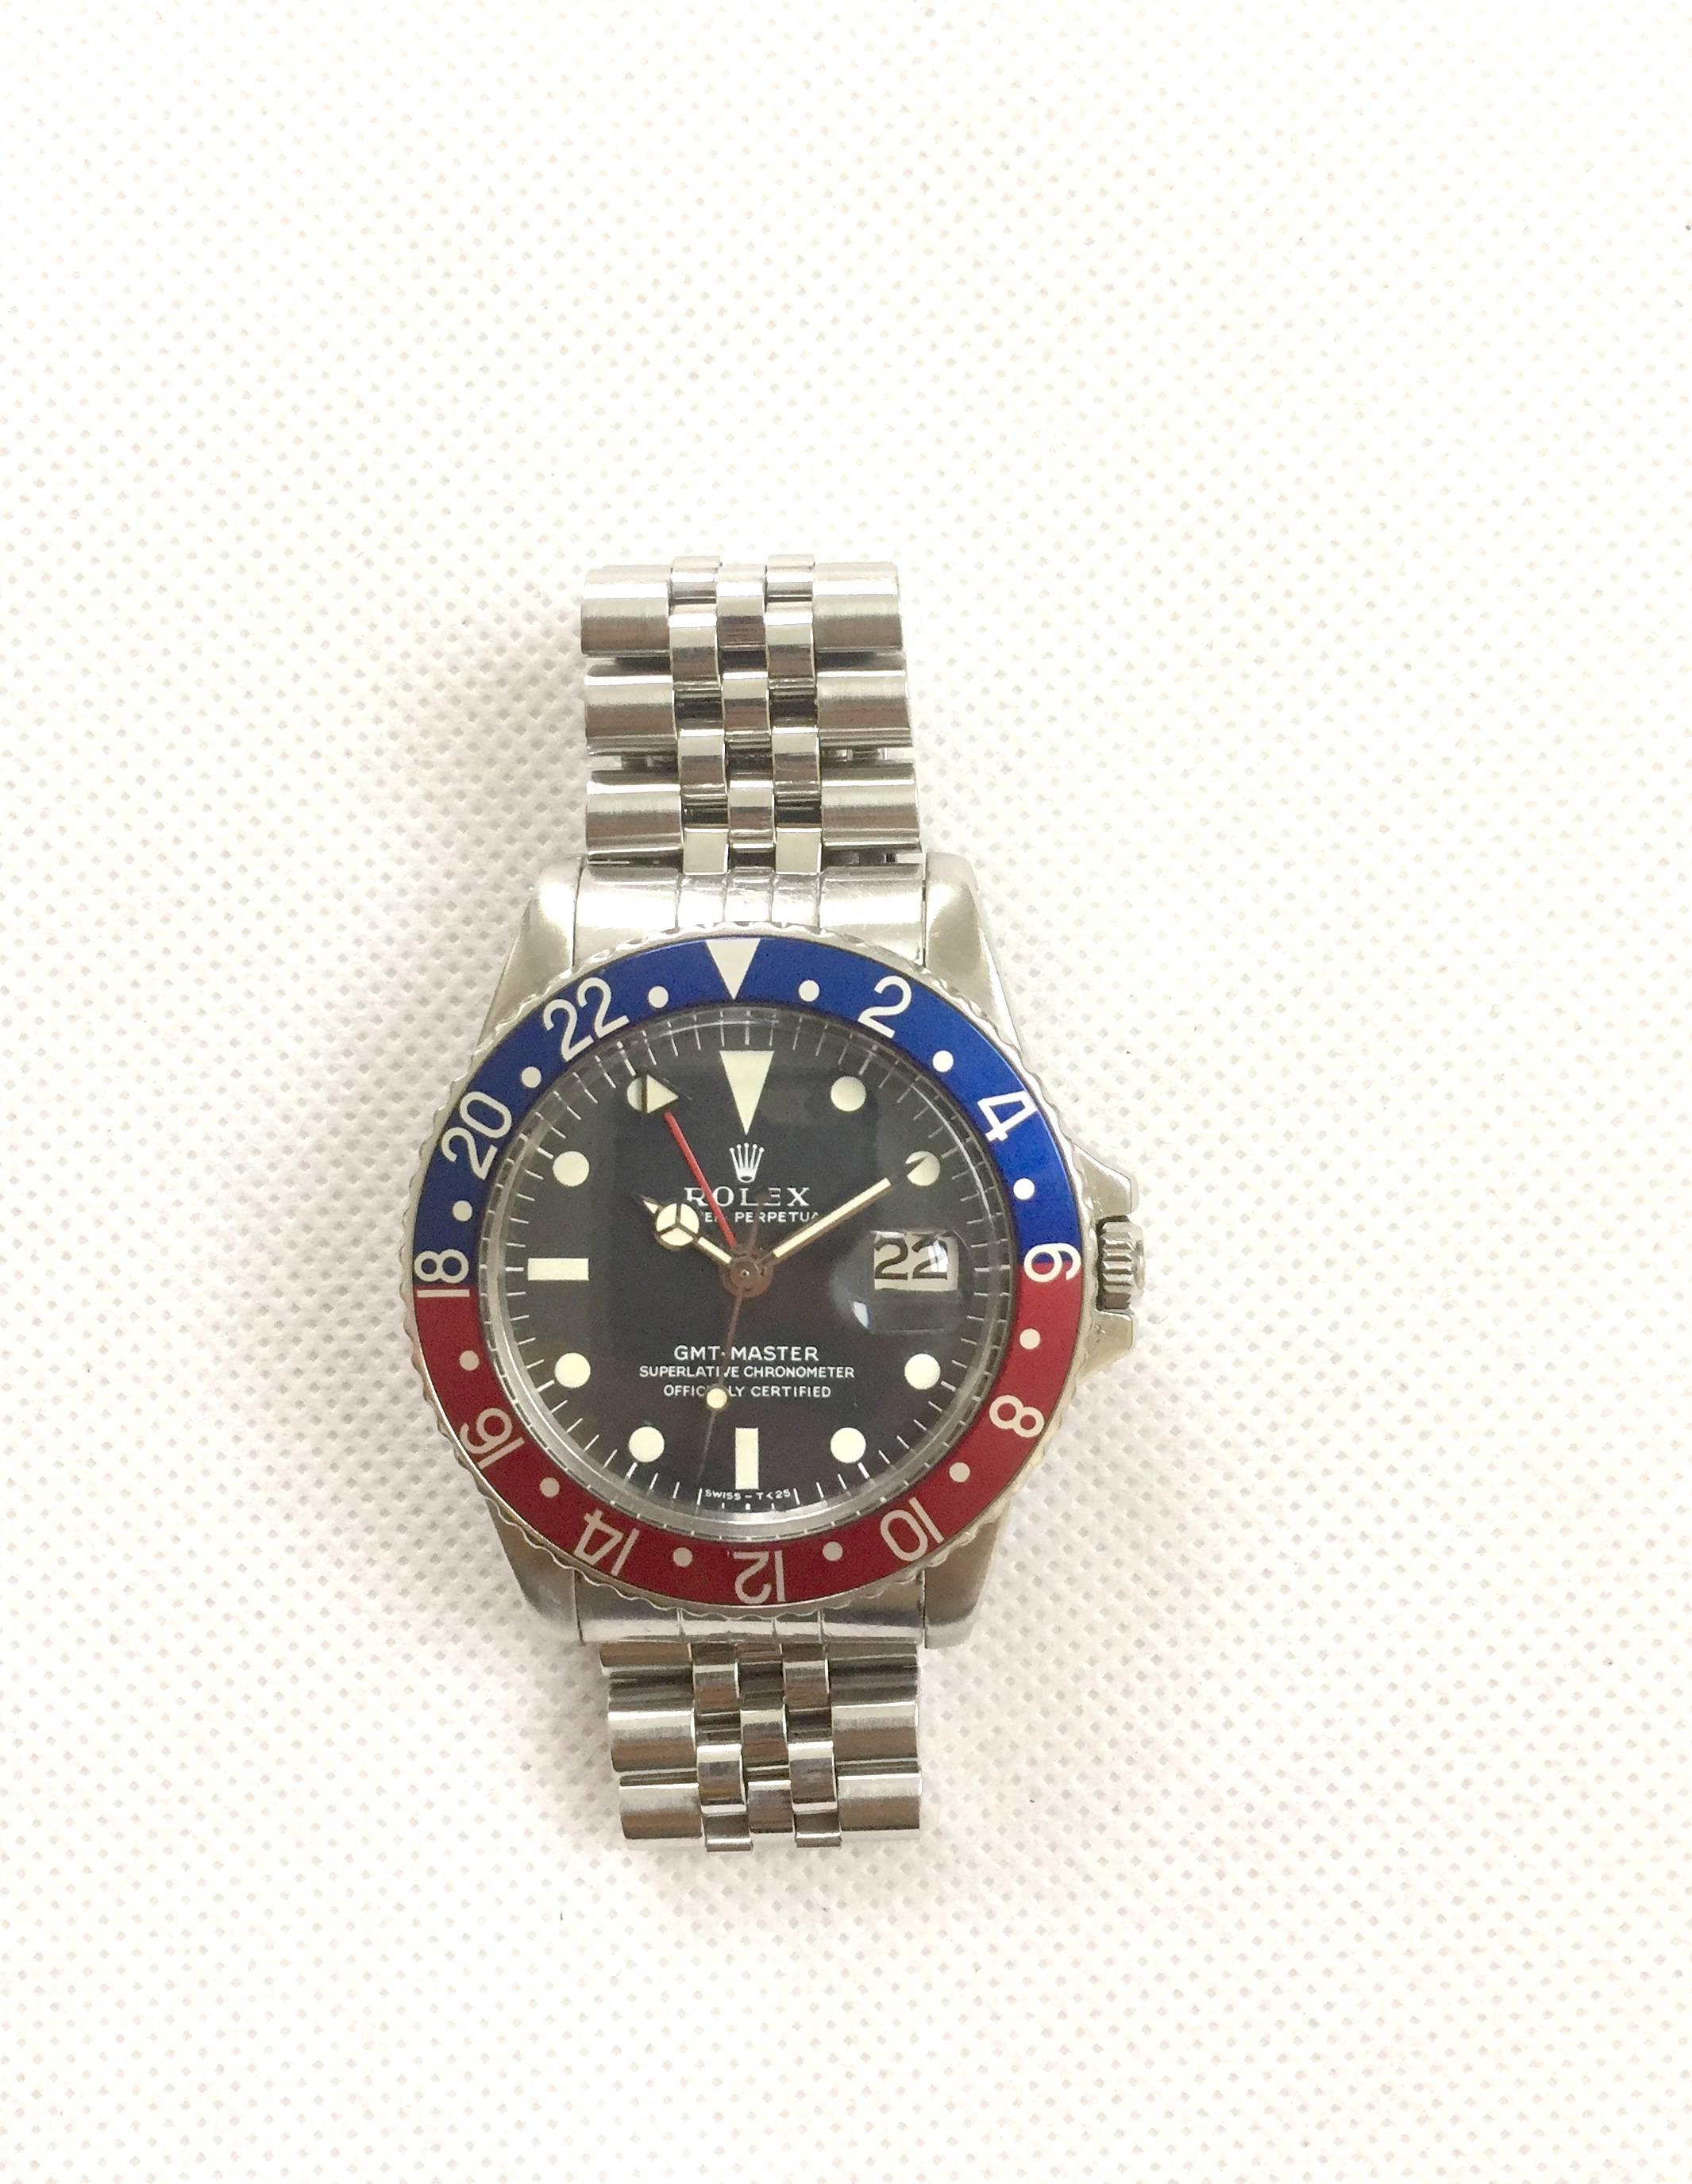 Rolex Stainless Steel Oyster Perpetual GMT Master Wristwatch
Reference 1675
Factory Black Matte Dial with White Toned Hour Markers and Matching Hands
Factory Blue and Red 'Pepsi" Bezel (Rotates Bi-Directional)
40mm in size 
Rolex Calibre Base